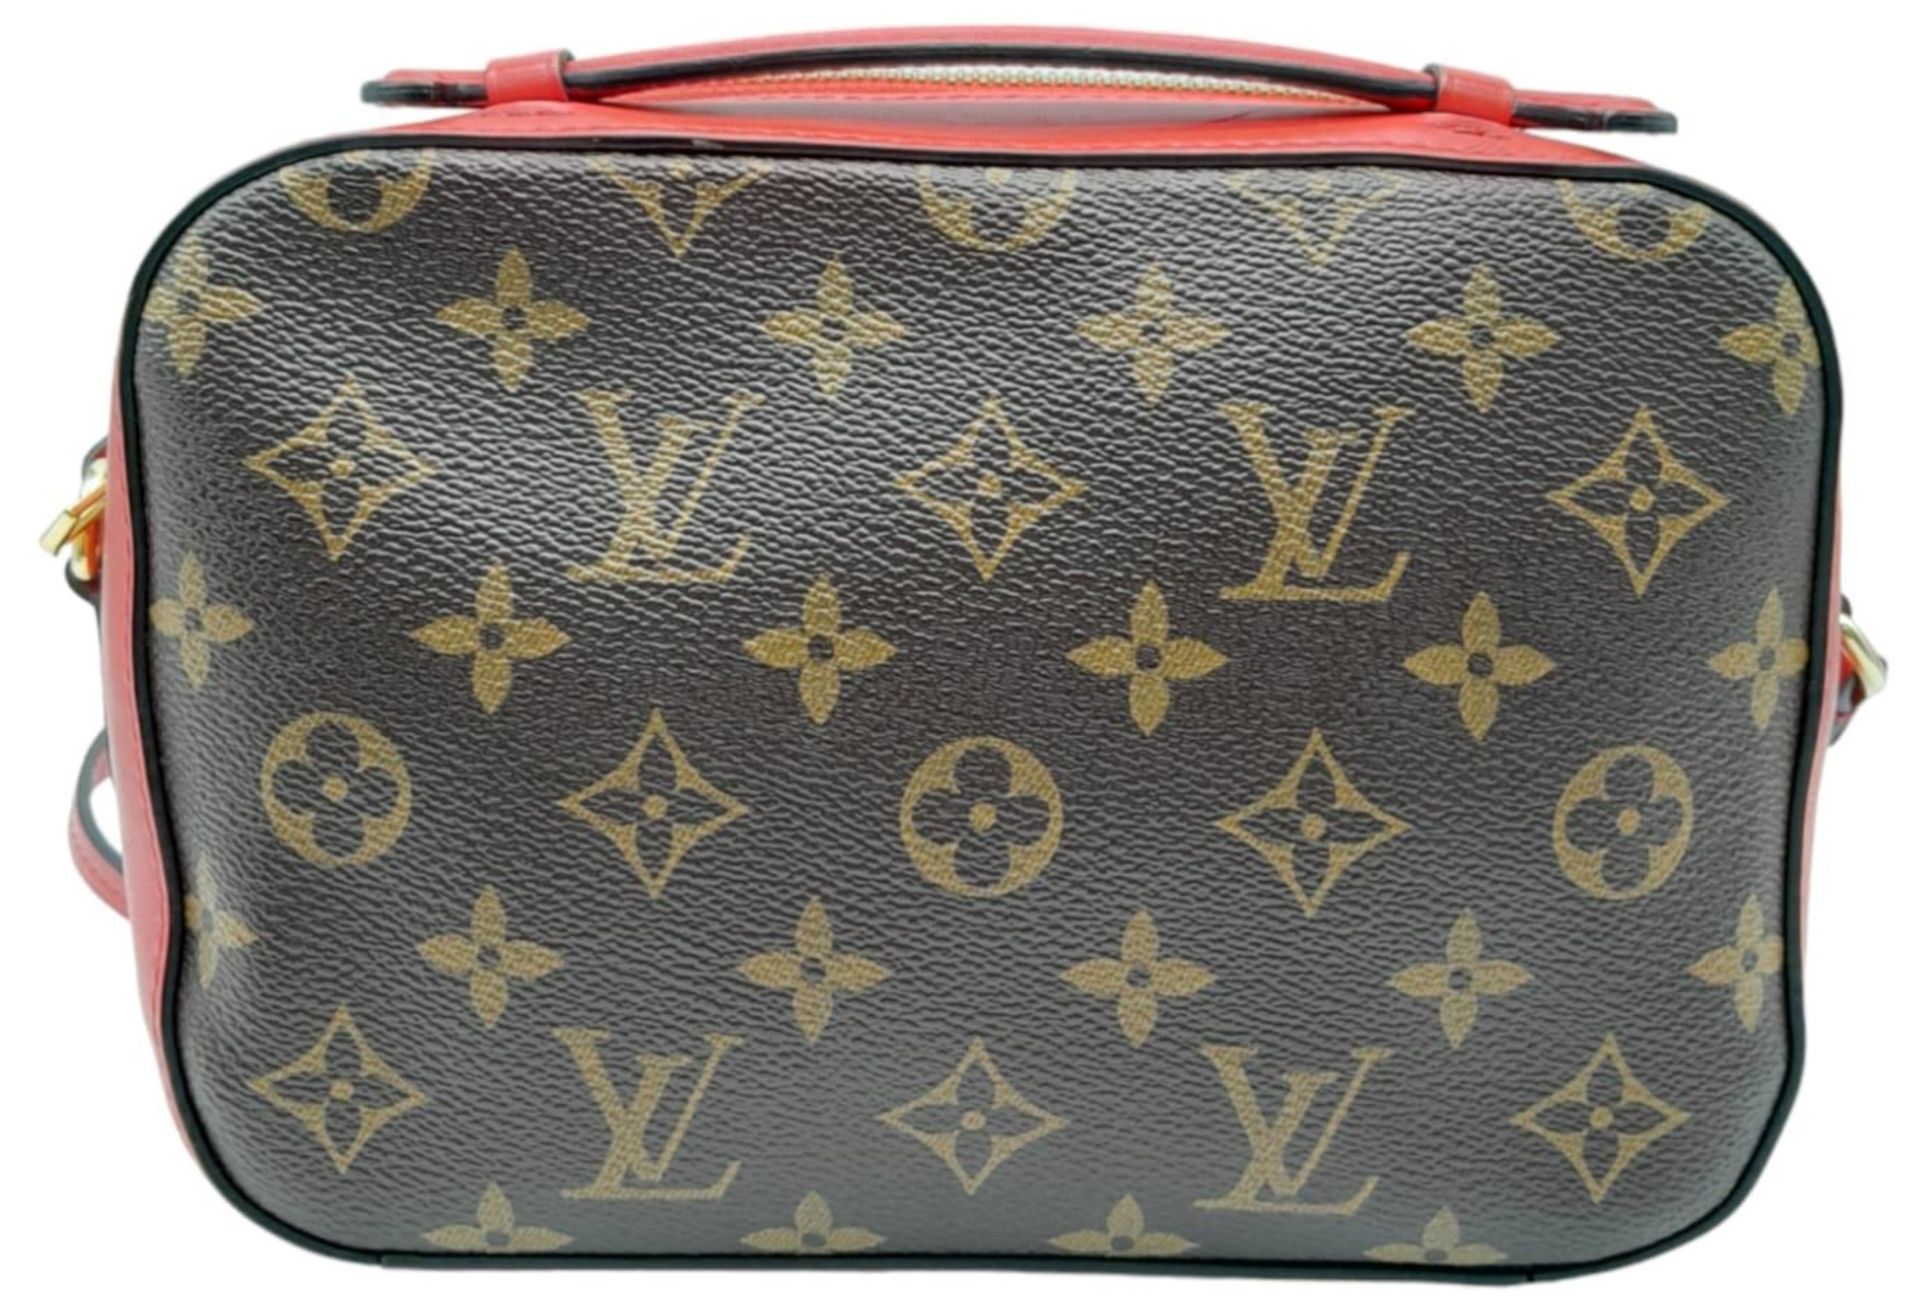 A Louis Vuitton Saintonge shoulder bag, classic monogram canvas with red leather exterior and - Image 4 of 9